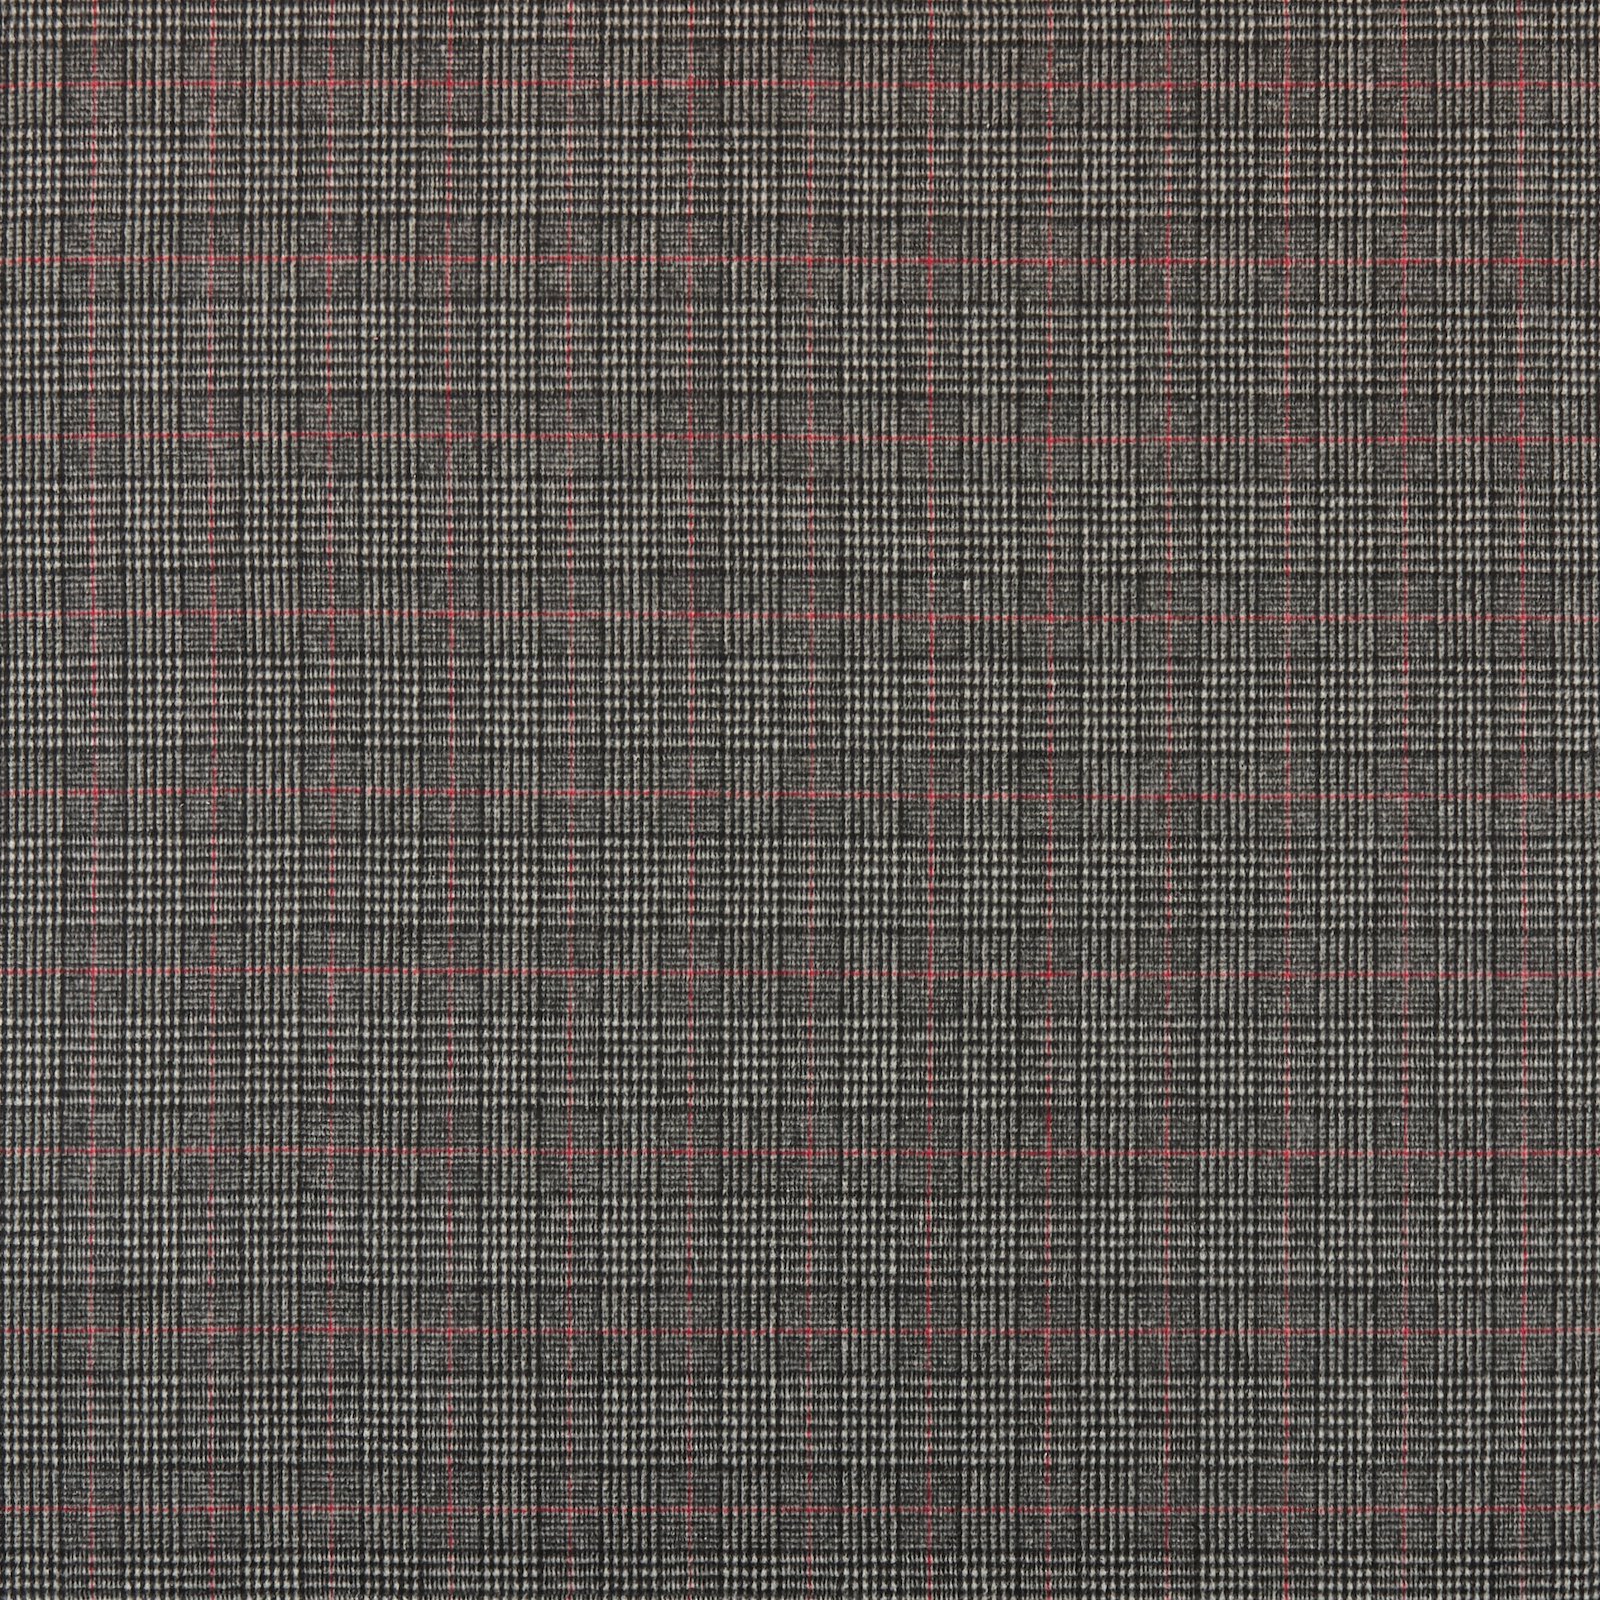 Woven wool black/white YD check 2-sided 300274_pack_sp